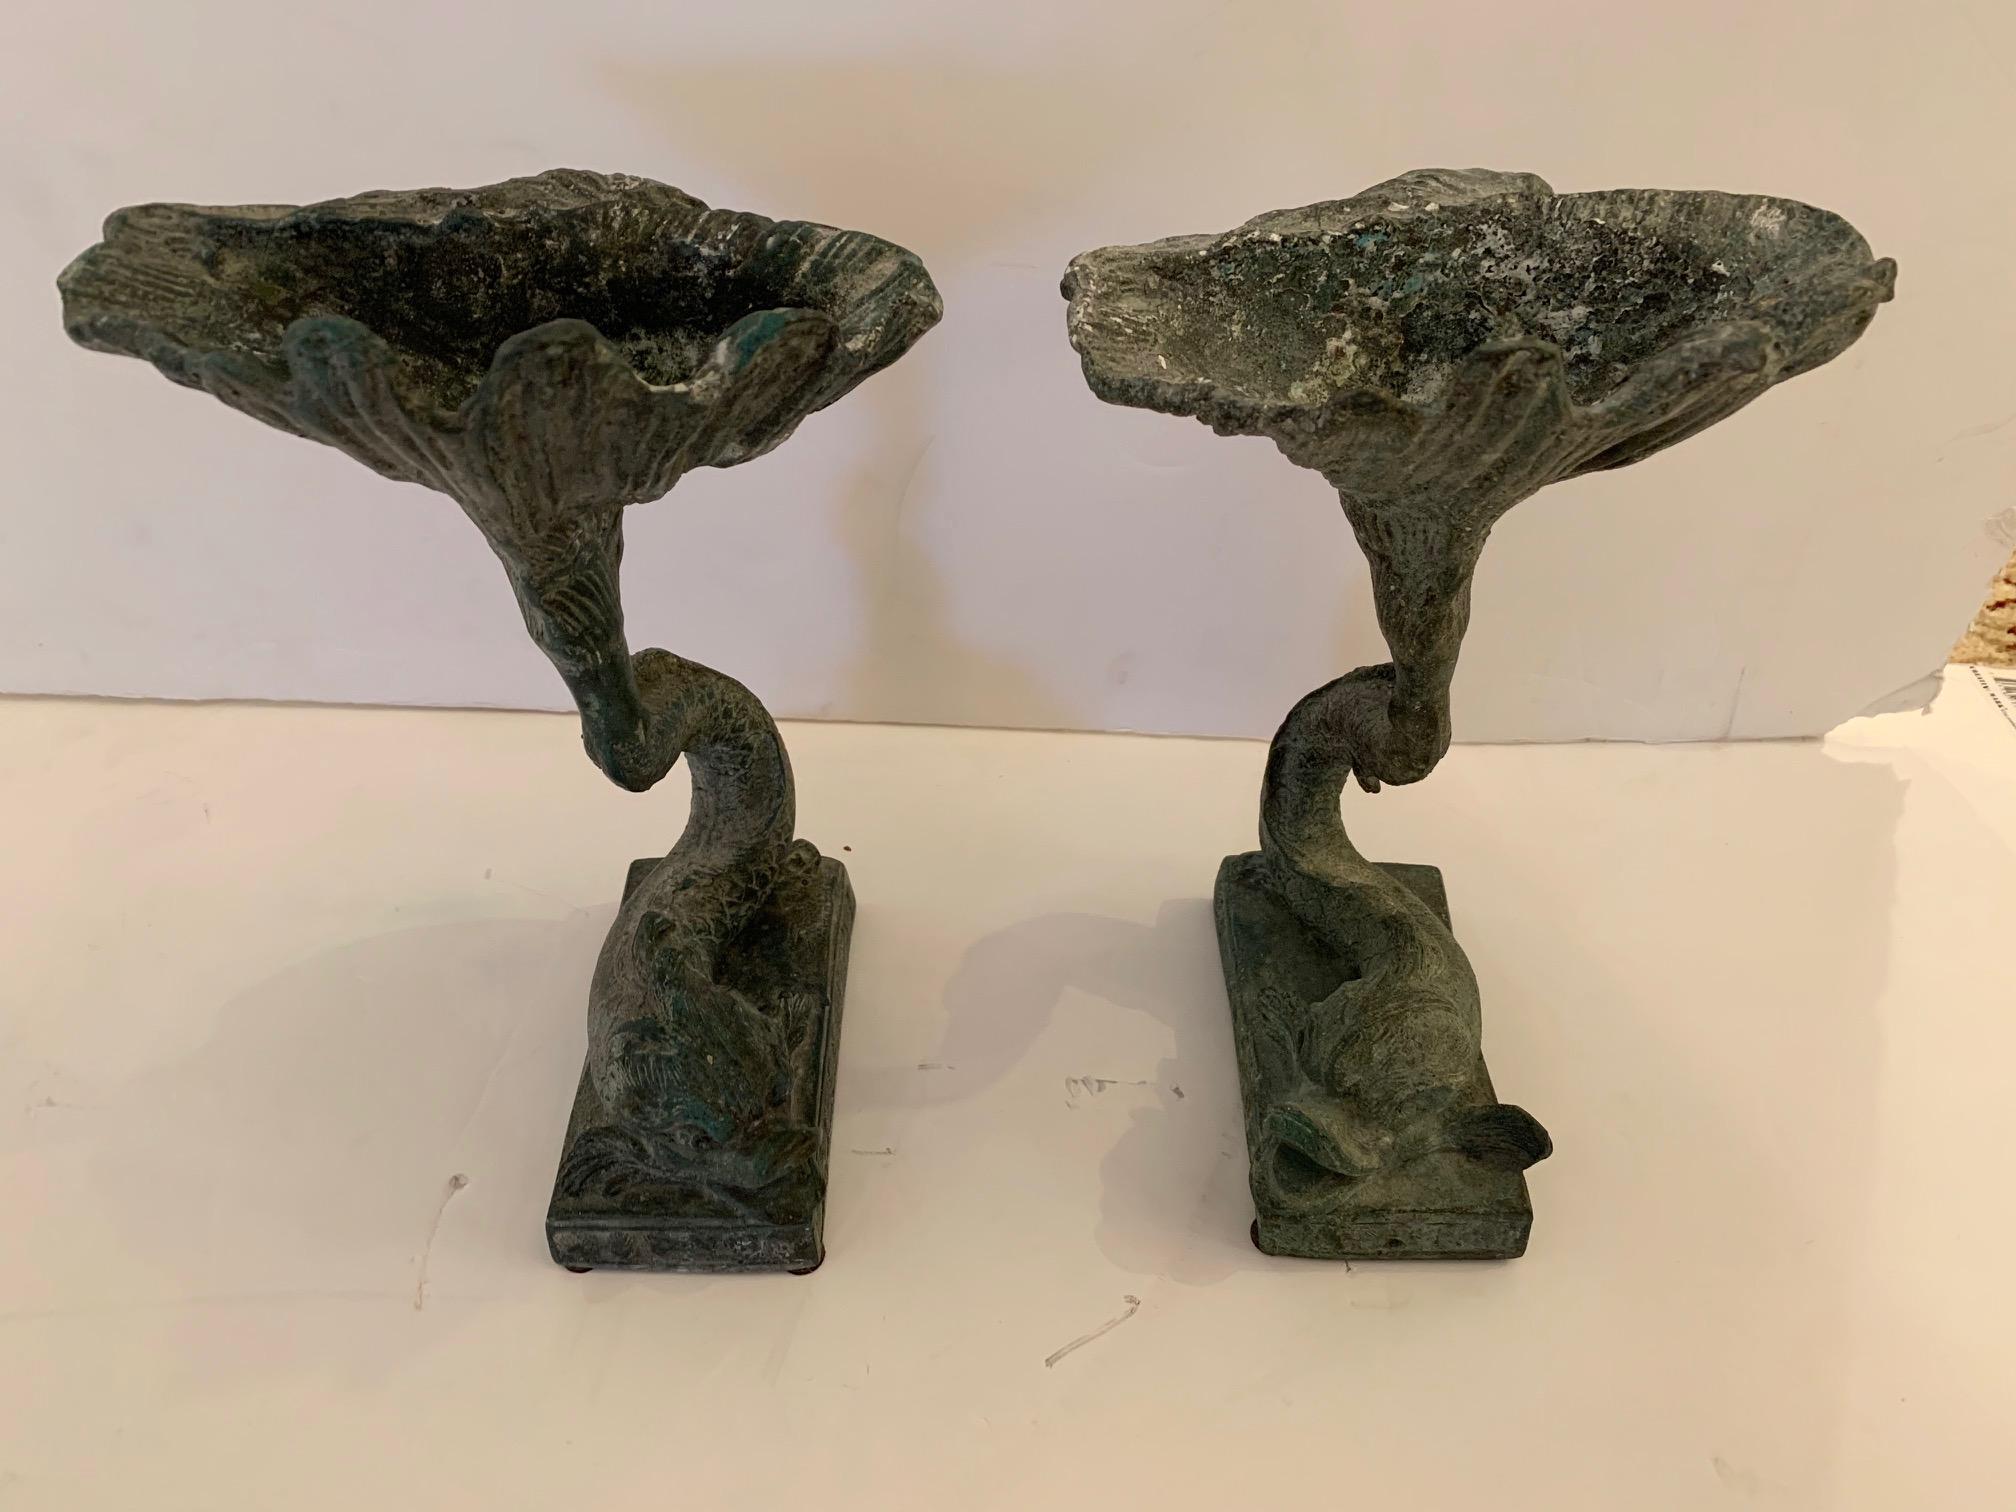 A pair of unusually expressionistic lead compotes having stylized elongated shape, earthy greenish black patina, and beautiful dolphin motif bases.